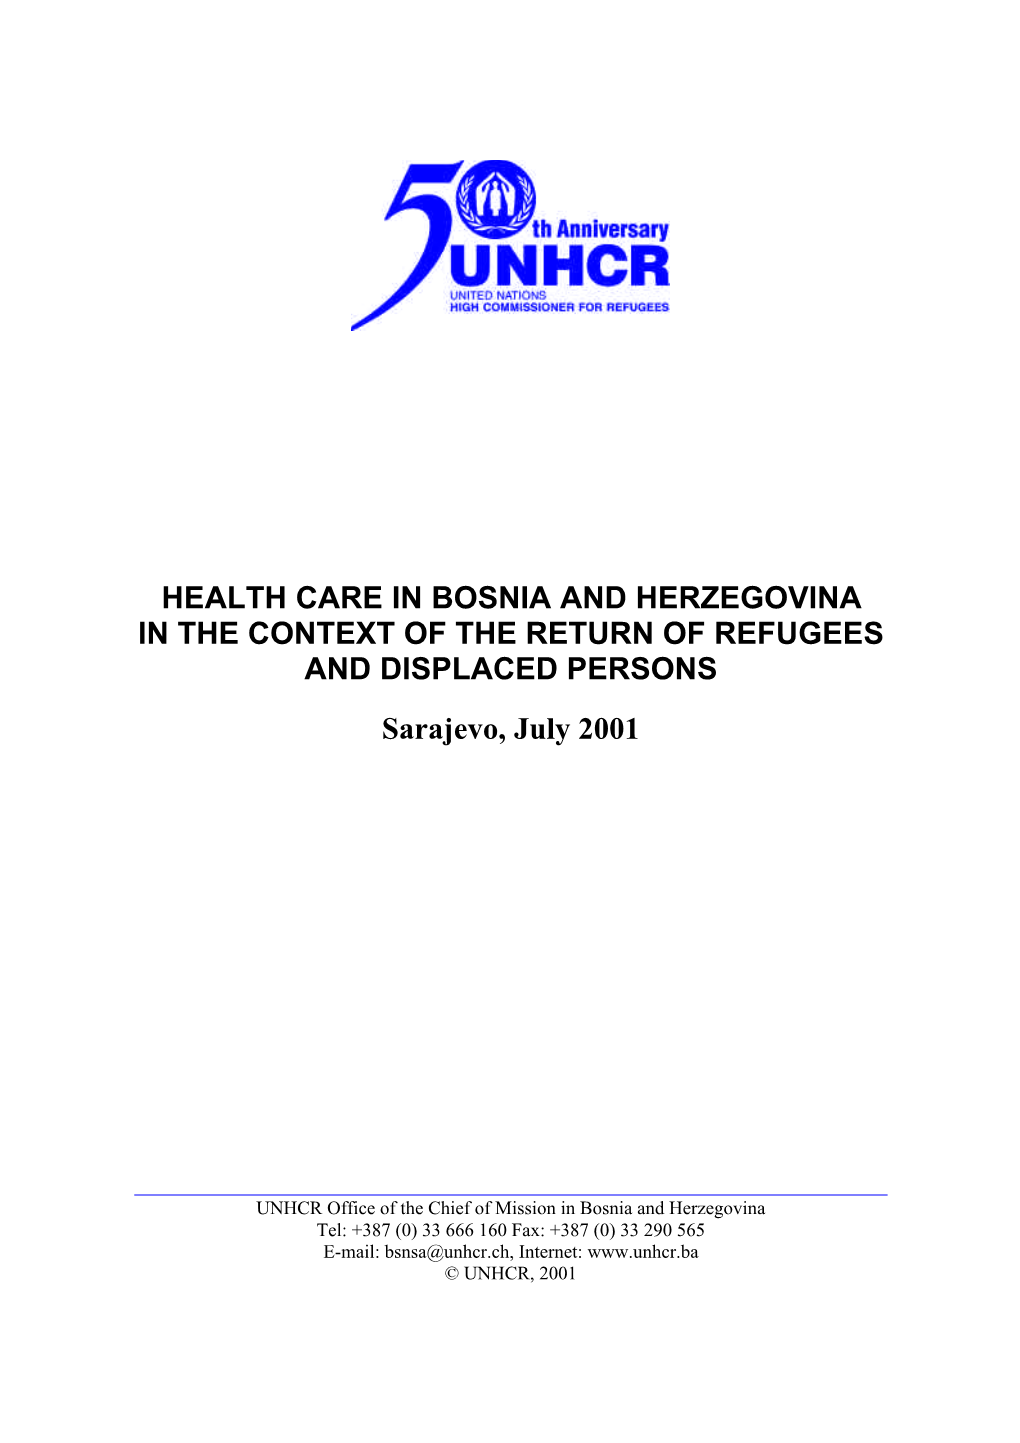 HEALTH CARE in BOSNIA and HERZEGOVINA in the CONTEXT of the RETURN of REFUGEES and DISPLACED PERSONS Sarajevo, July 2001